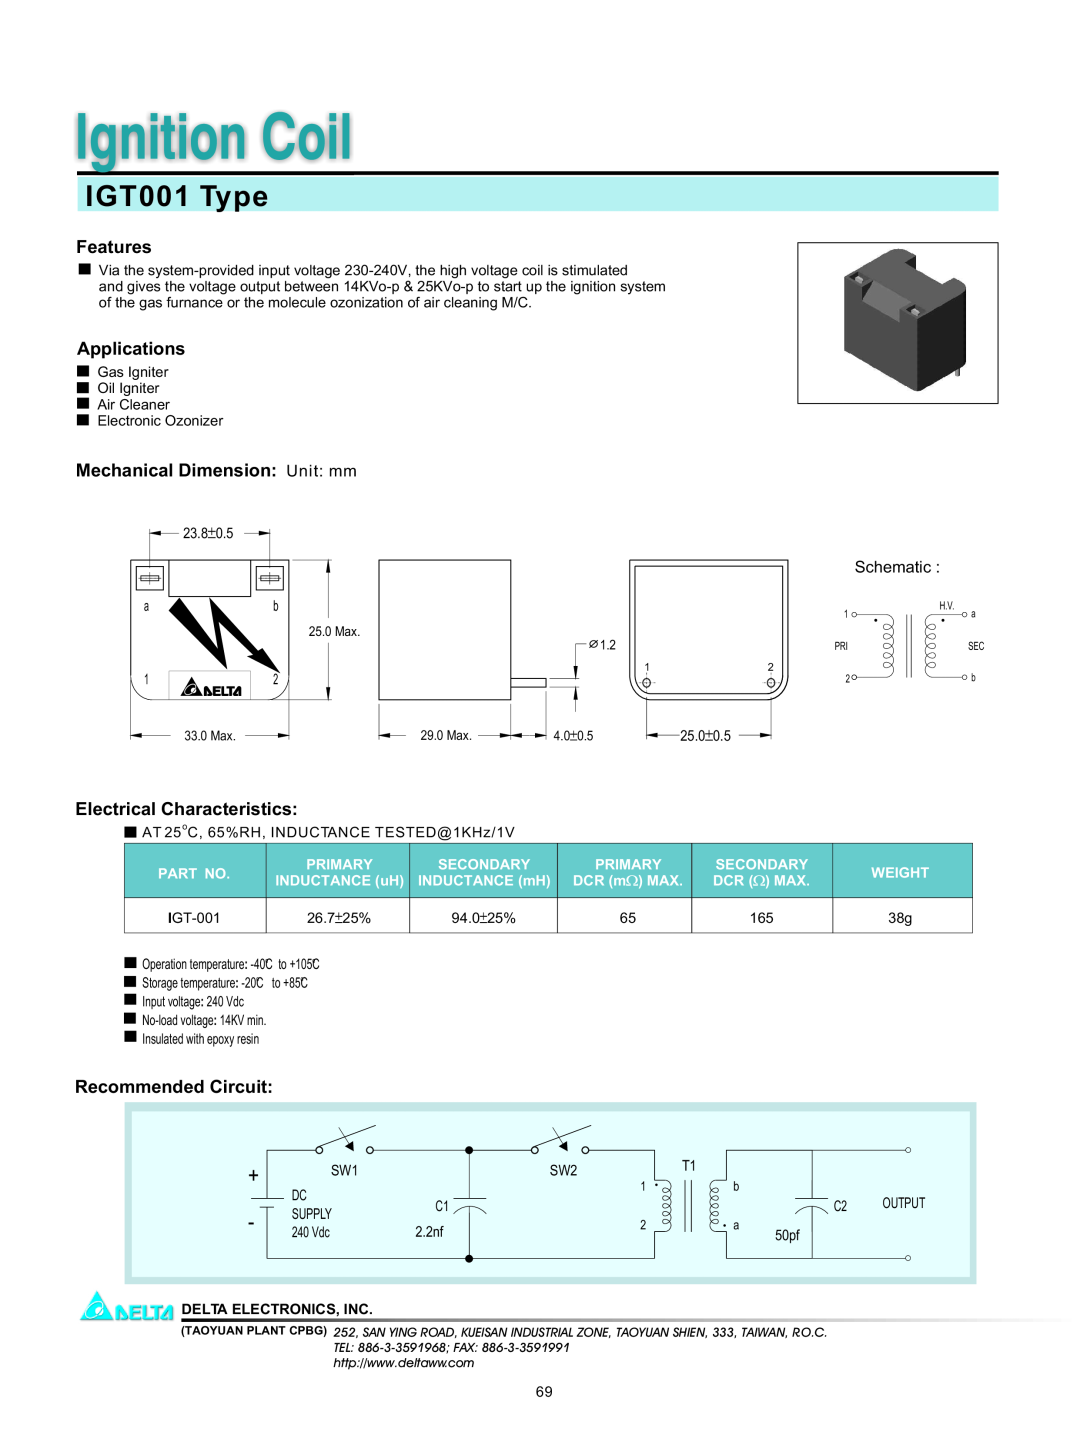 Delta Electronics manual Ignition Coil, IGT001 Type, Features, Applications, Mechanical Dimension Unit mm, Schematic 